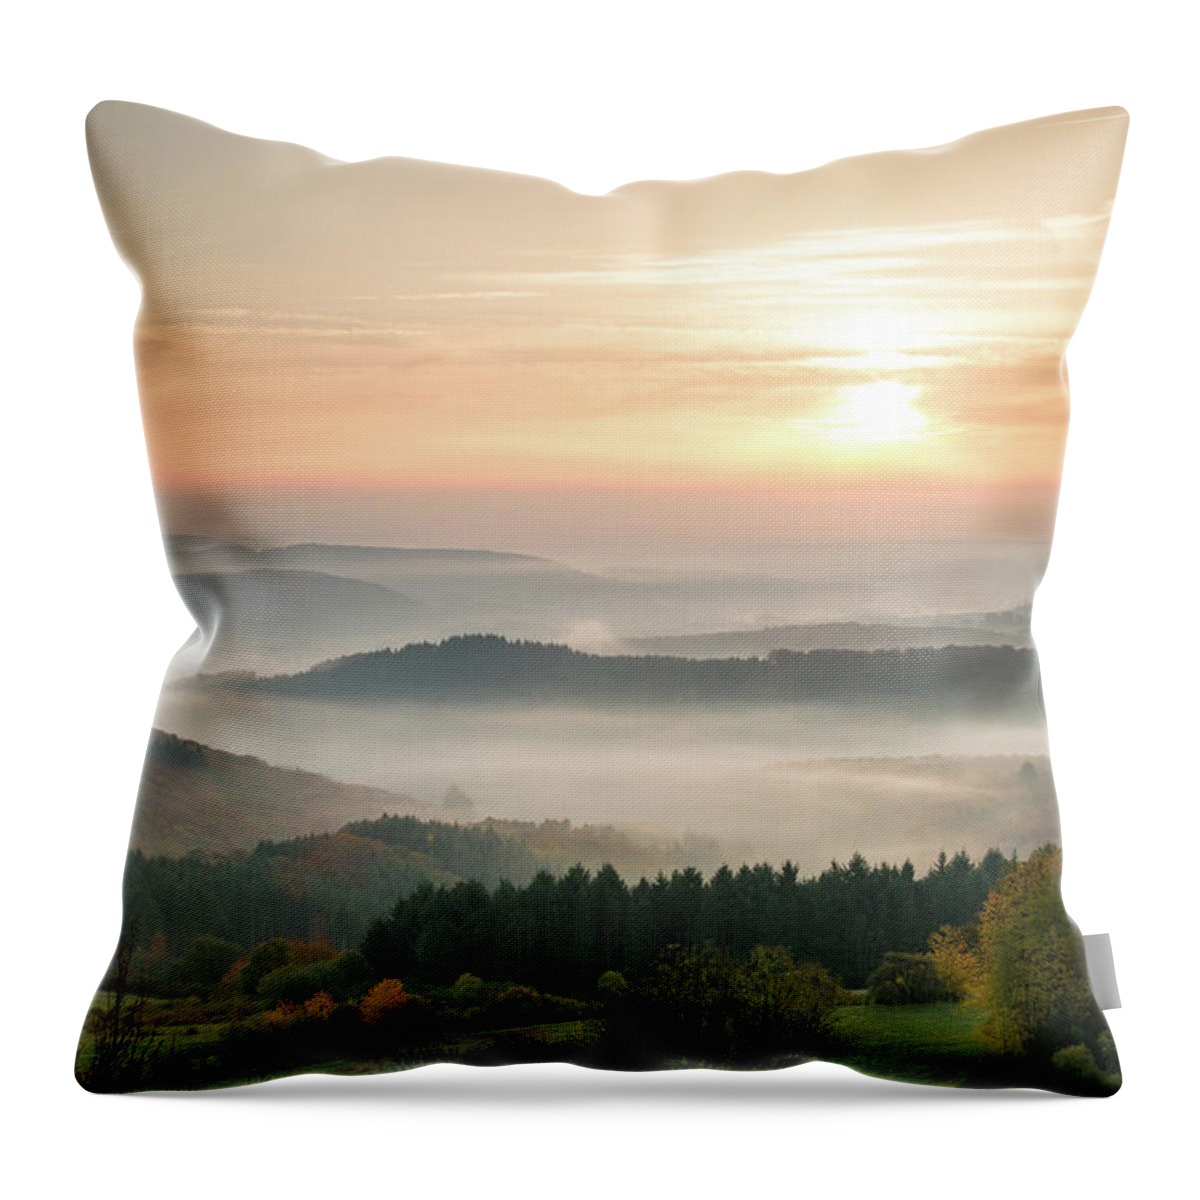 Scenics Throw Pillow featuring the photograph Autumn Foggy Sunrise by Marcoschmidt.net